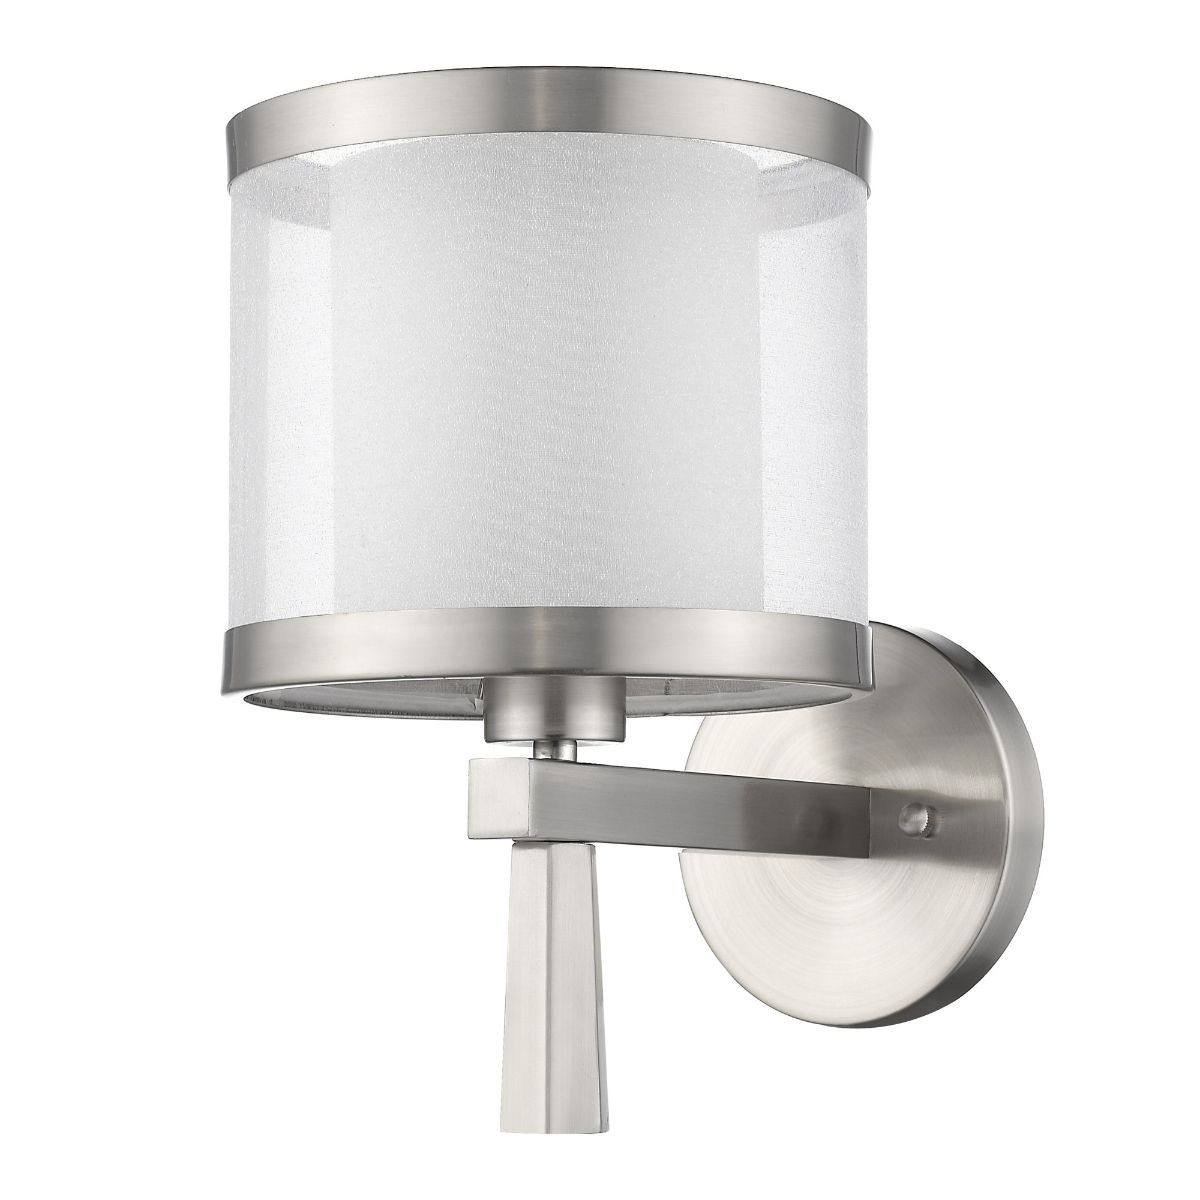 Lux 13 in. Armed Sconce Nickel Finish